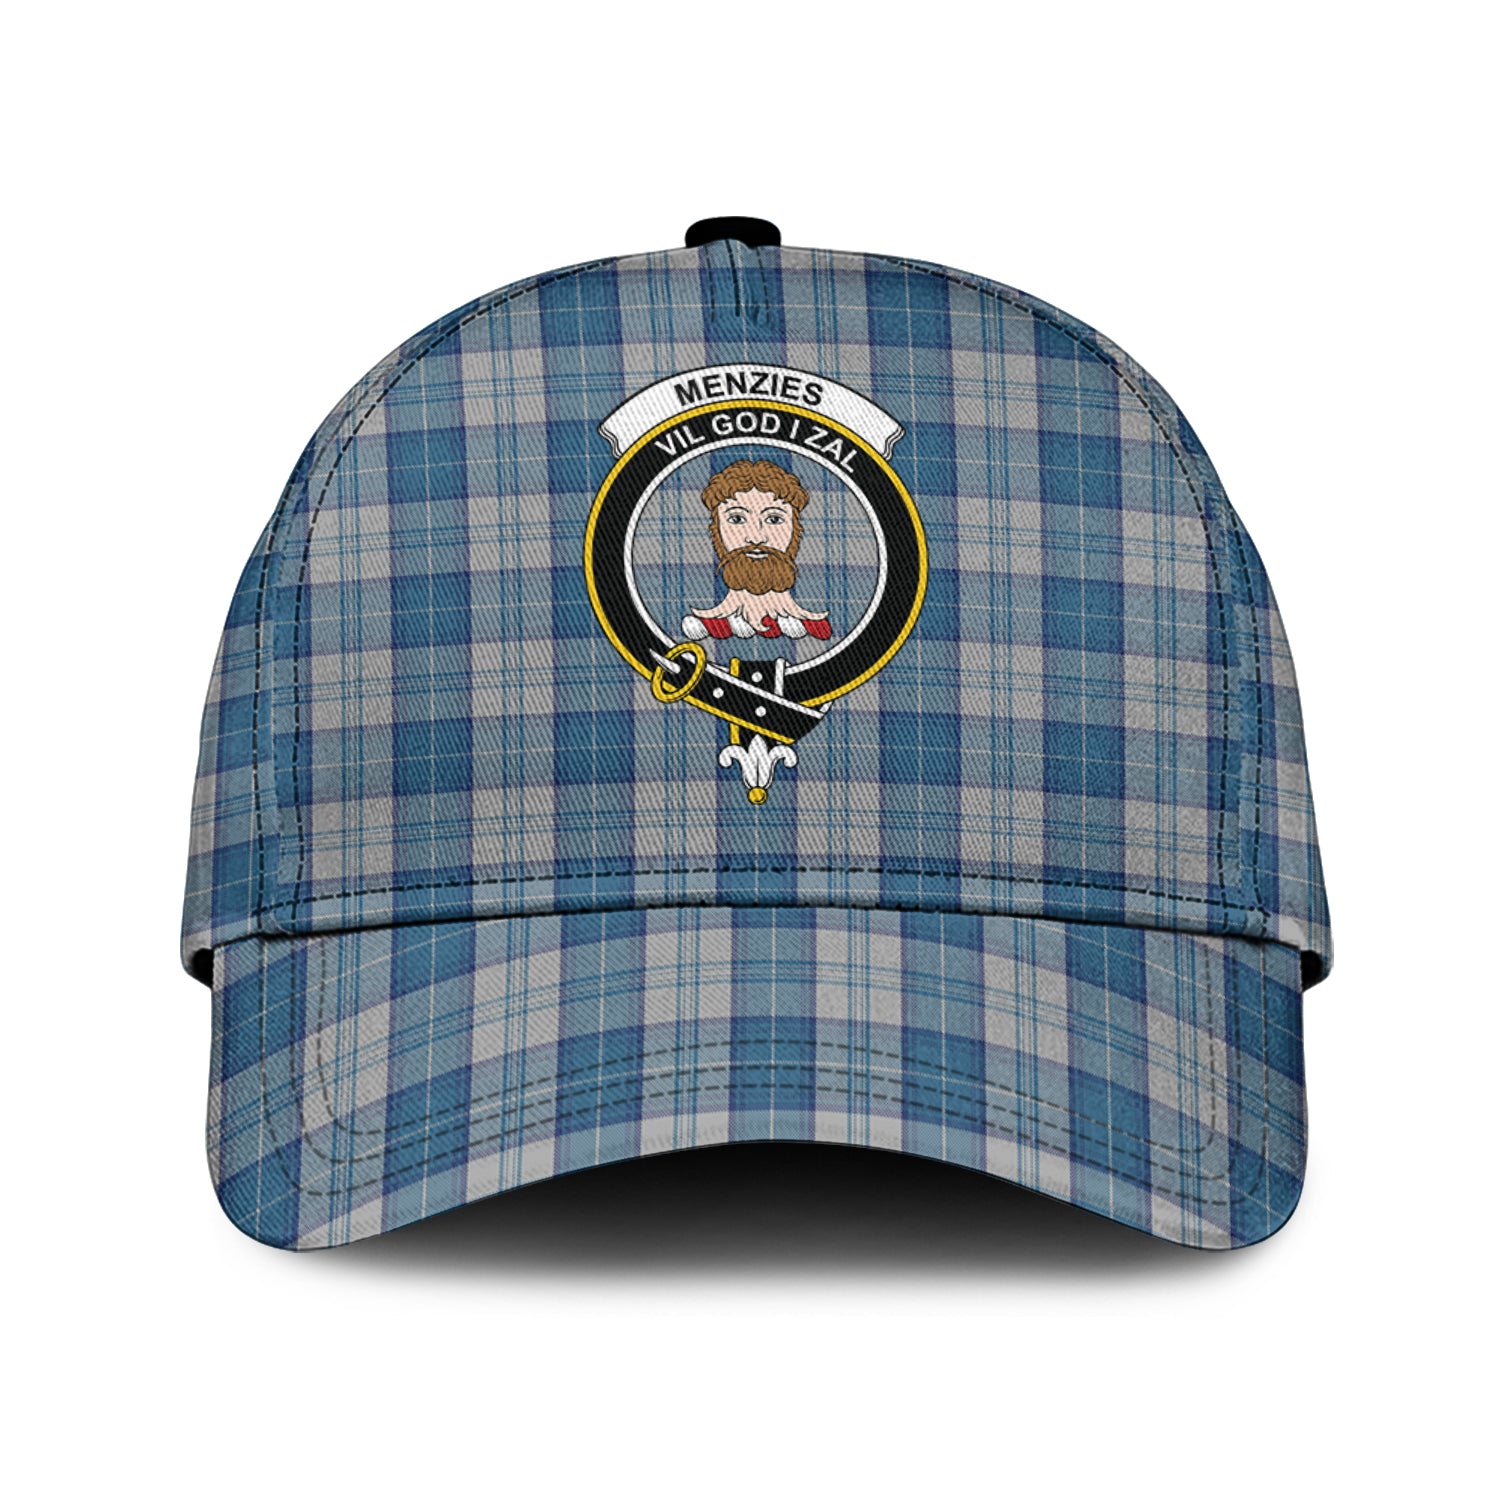 menzies-dress-blue-and-white-tartan-classic-cap-with-family-crest